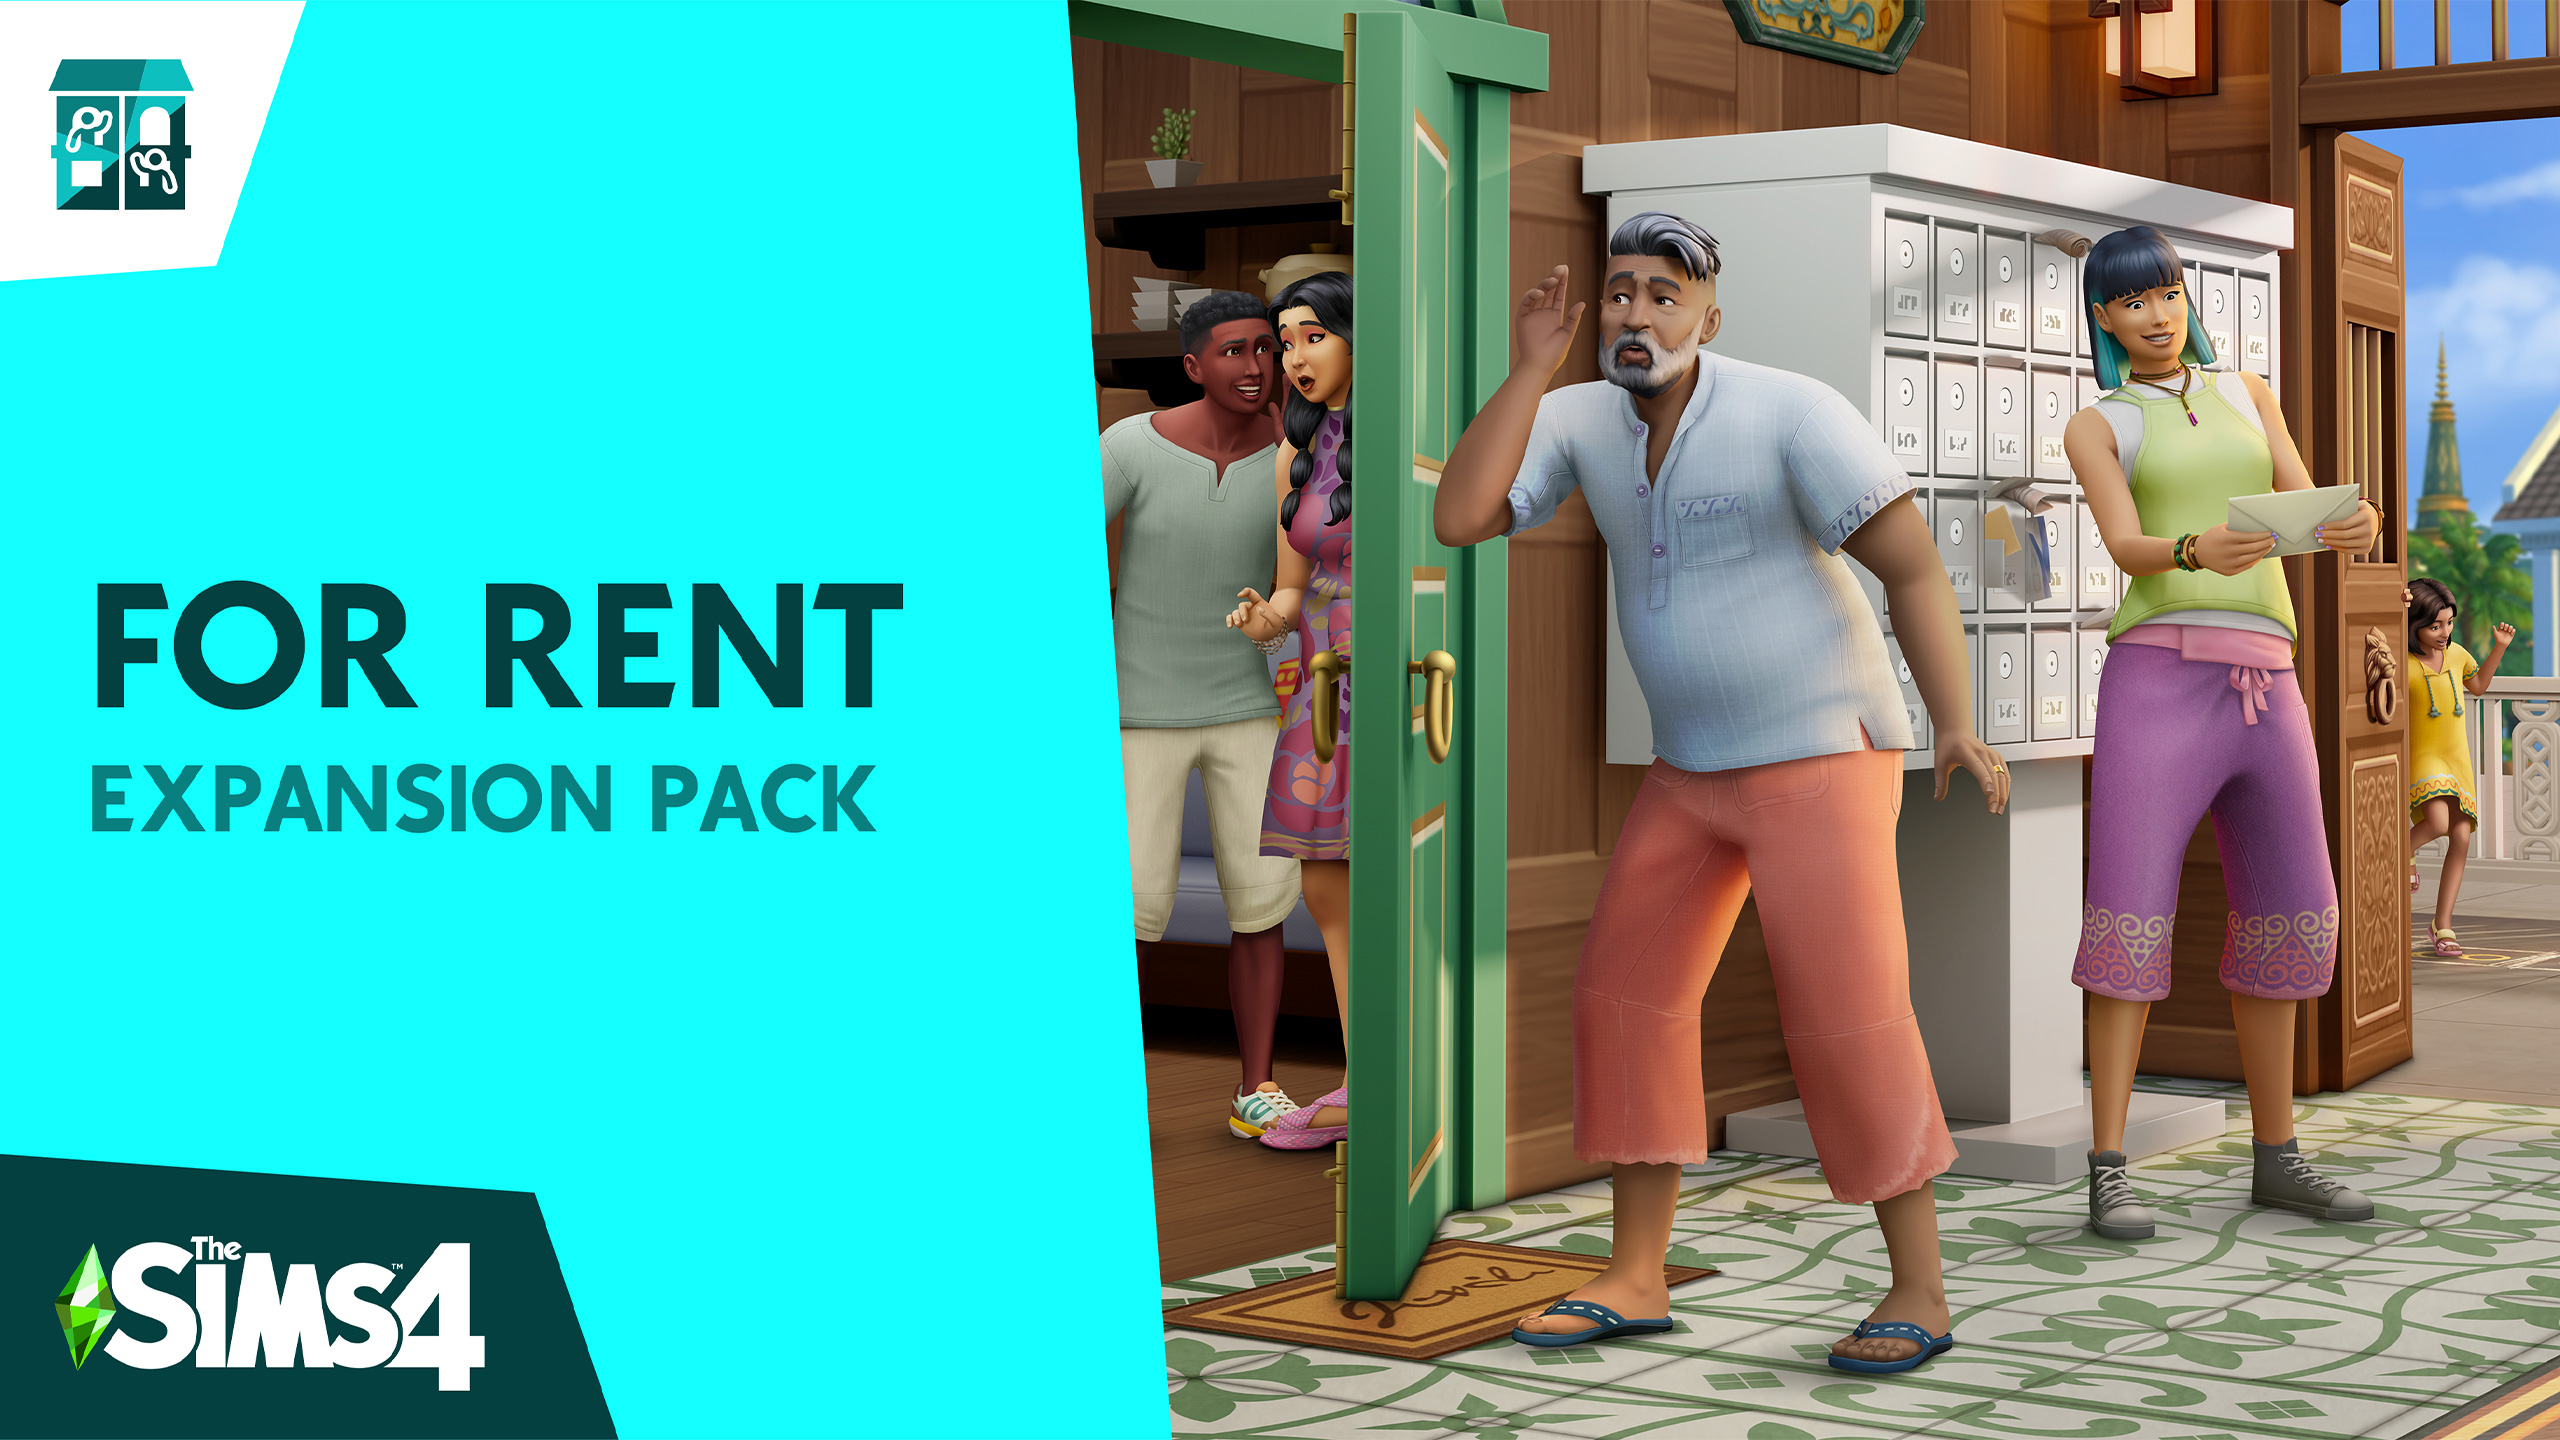 The Sims 4 For Rent Expansion Pack